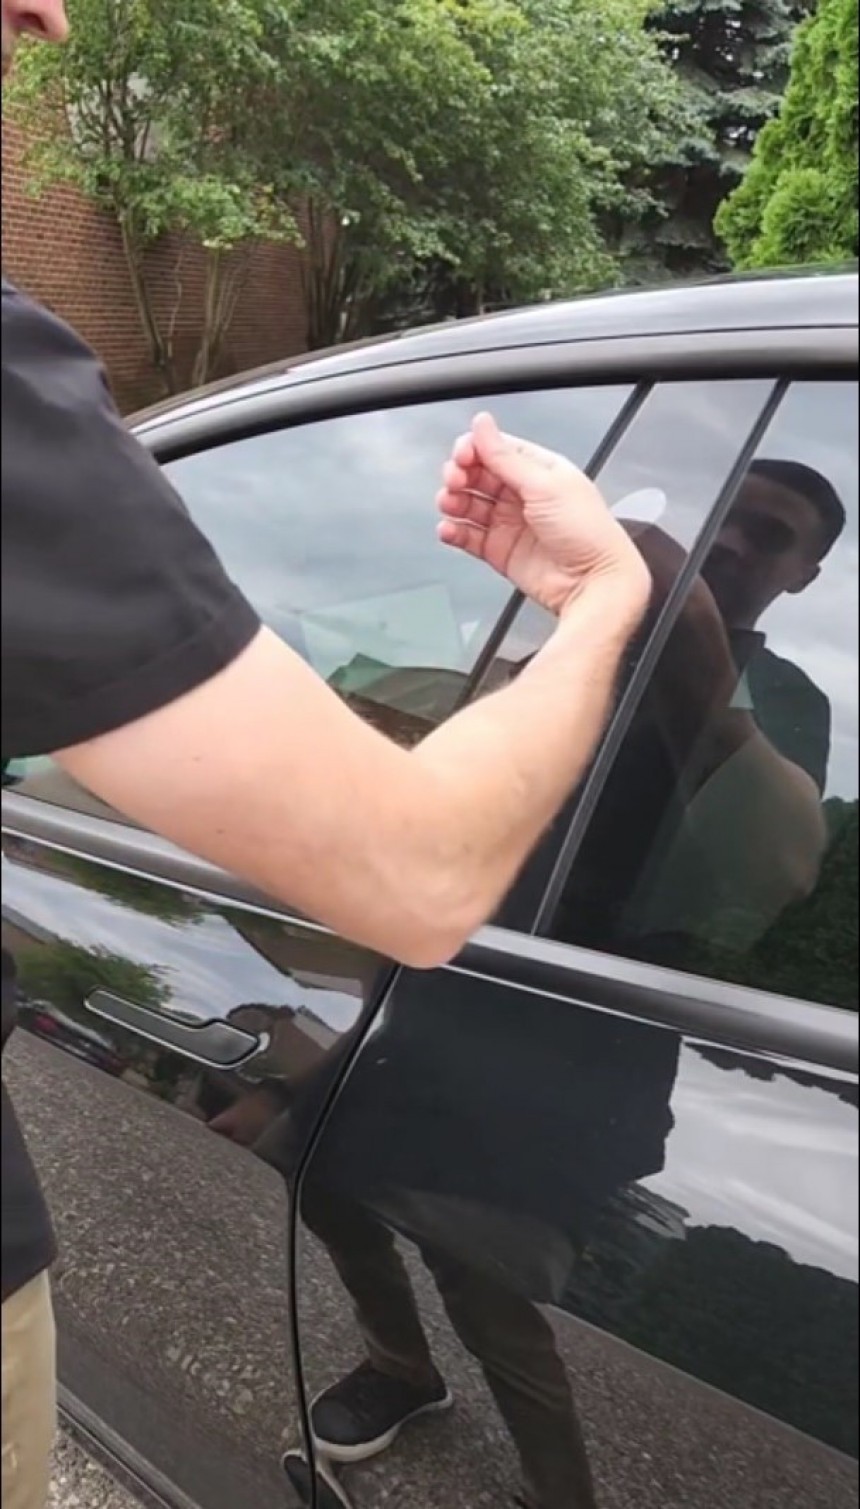 Tesla Model 3 Performance Owner Gets an Implant to Get into His Car More Easily